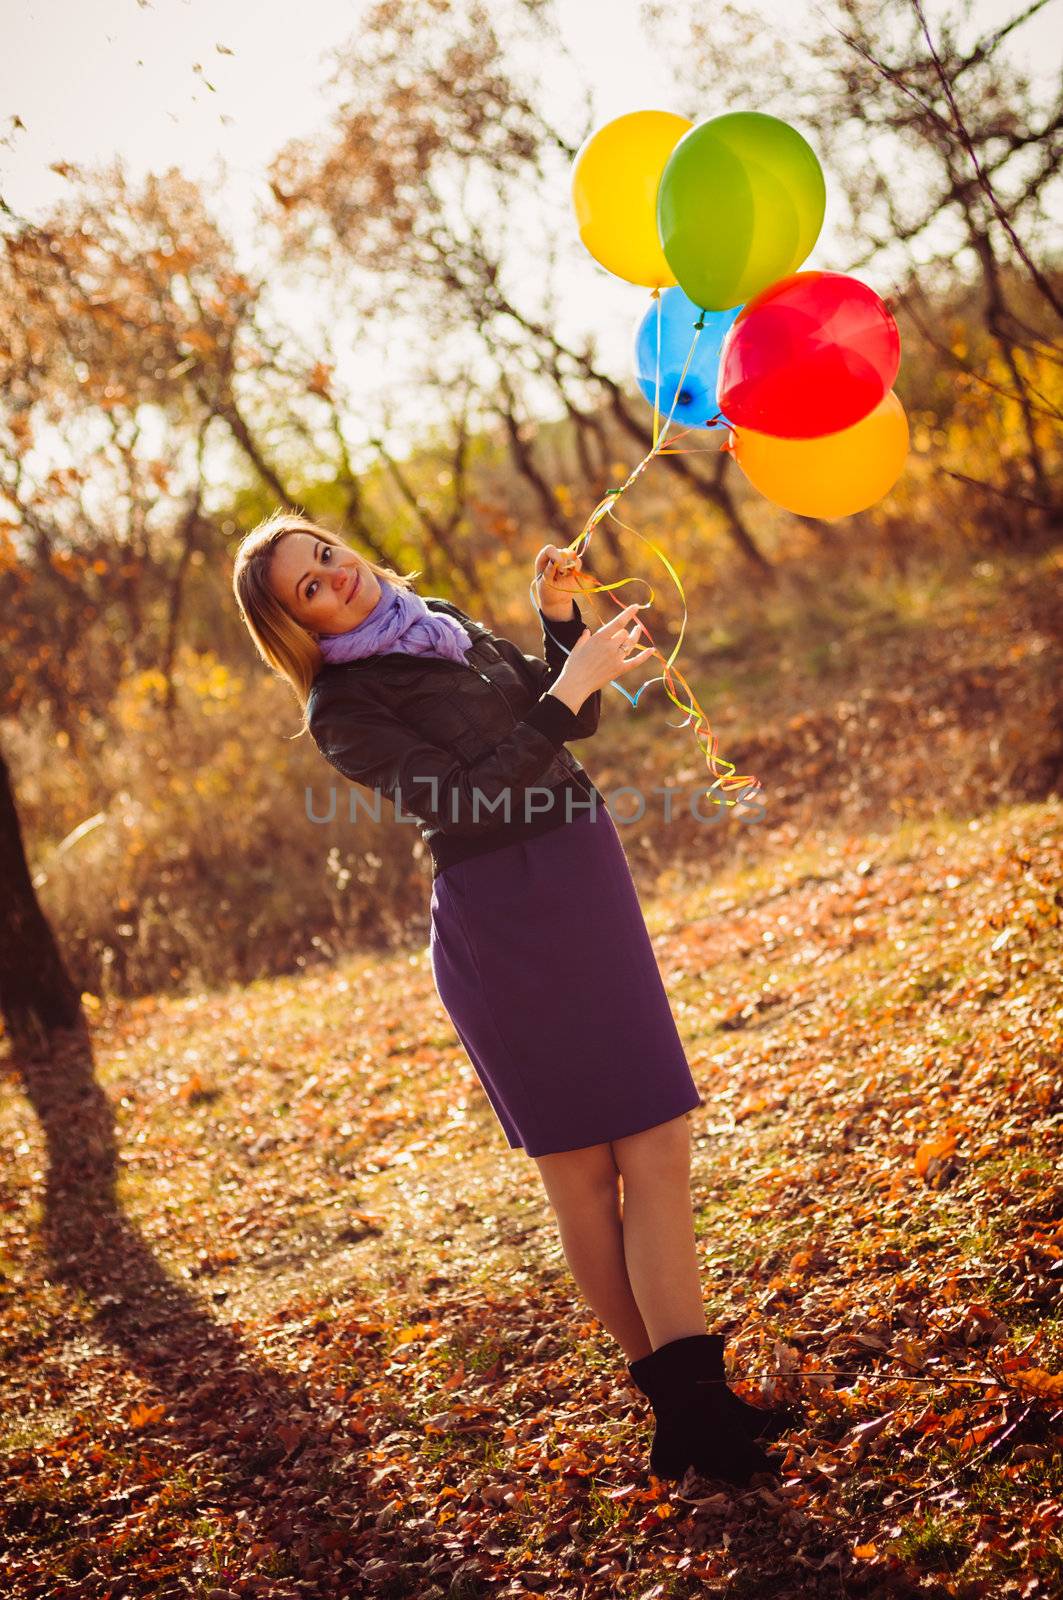 Girl with ballons by nvelichko